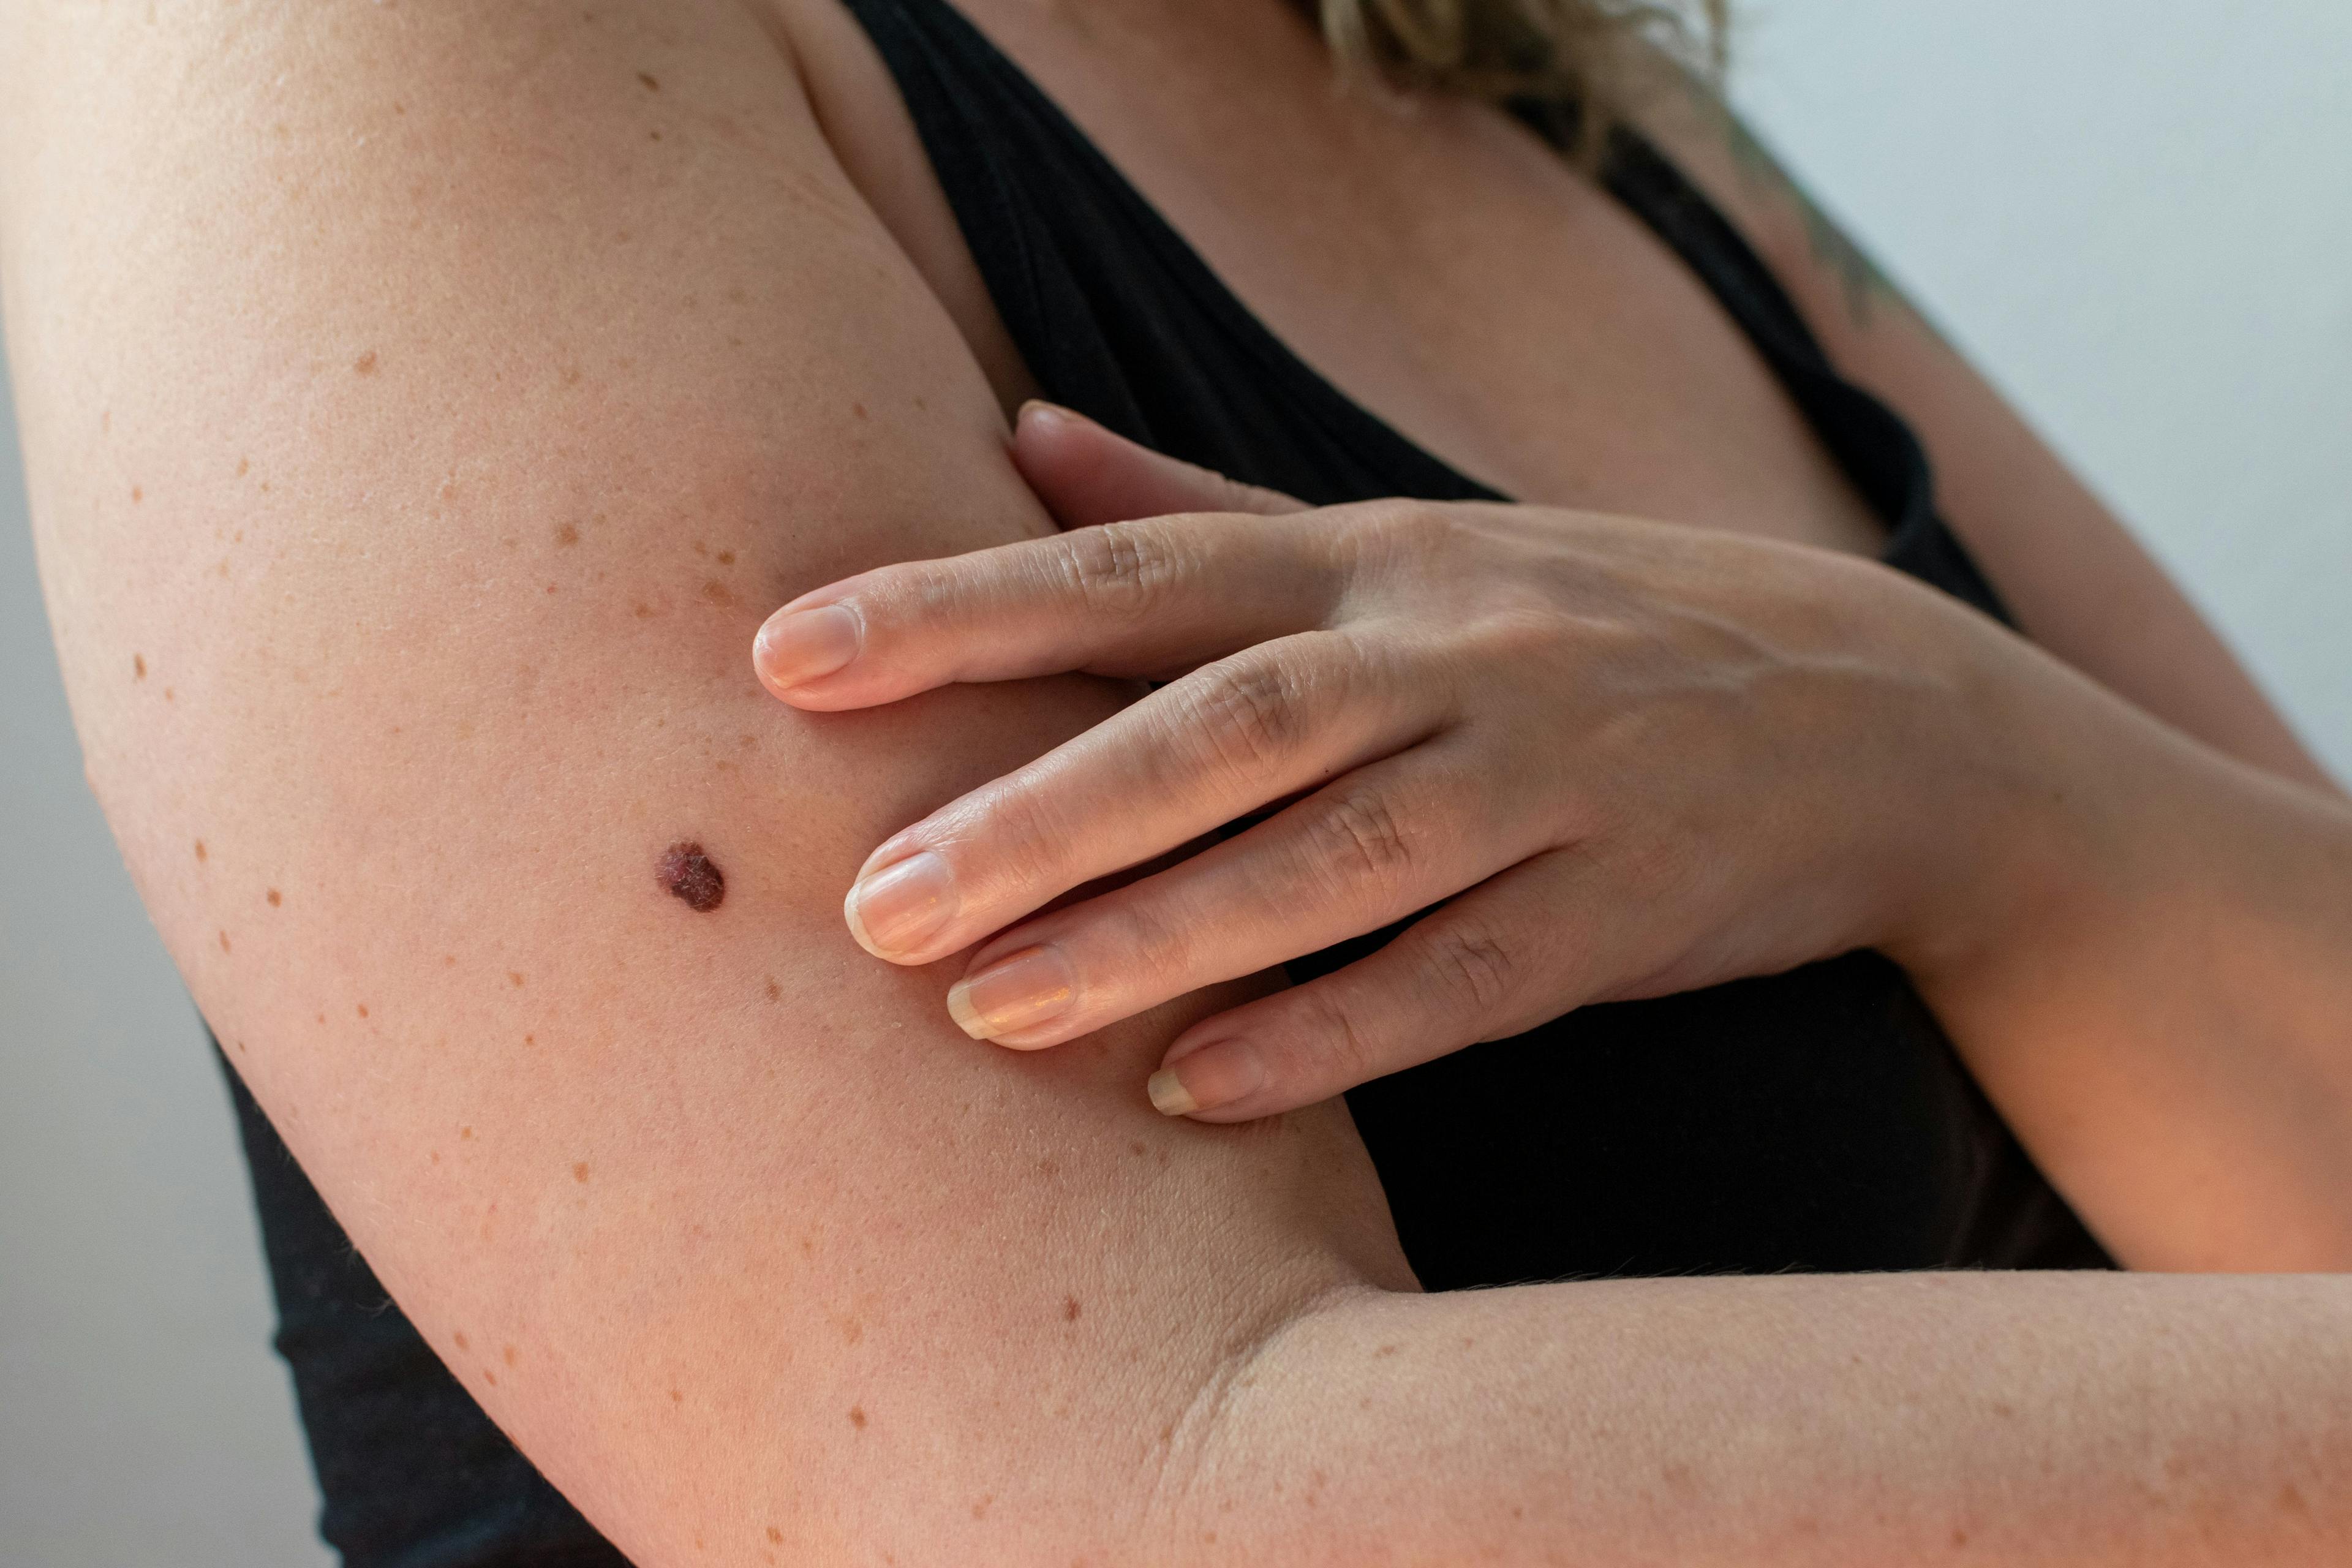 woman checking her skin for an abnormal mole for signs of melanoma skin cancer | Image credit: MW Photography - stock.adobe.com